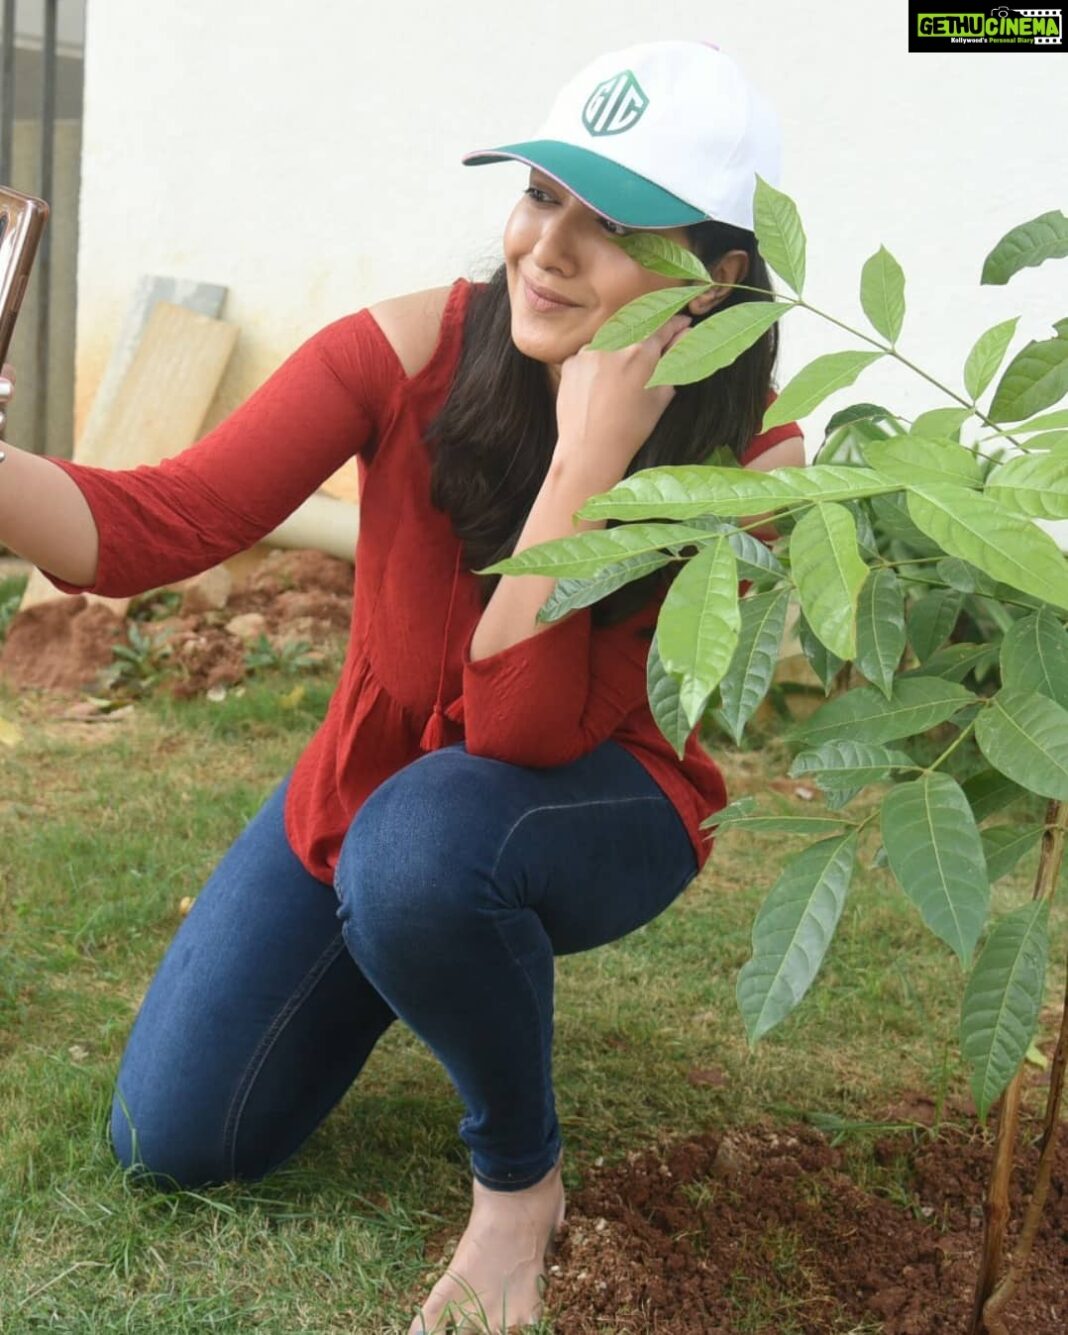 Catherine Tresa Instagram - I've accepted the #HaraHaiTohBharaHai #GreenindiaChallenge and planted 3 saplings at home ☺️. I can't stress enough on the need for us to plant more trees considering the rate at which we are chopping them down. Thank you Santosh garu for coming up with this initiative. Also nominating @worldofsiddharth @atharvaamurali @aryaoffl to plant 3 trees & continue the chain. Requesting all of you to also do your bit and plant a tree wherever you can☺️ #treesgiveusoxygen #plantasapling